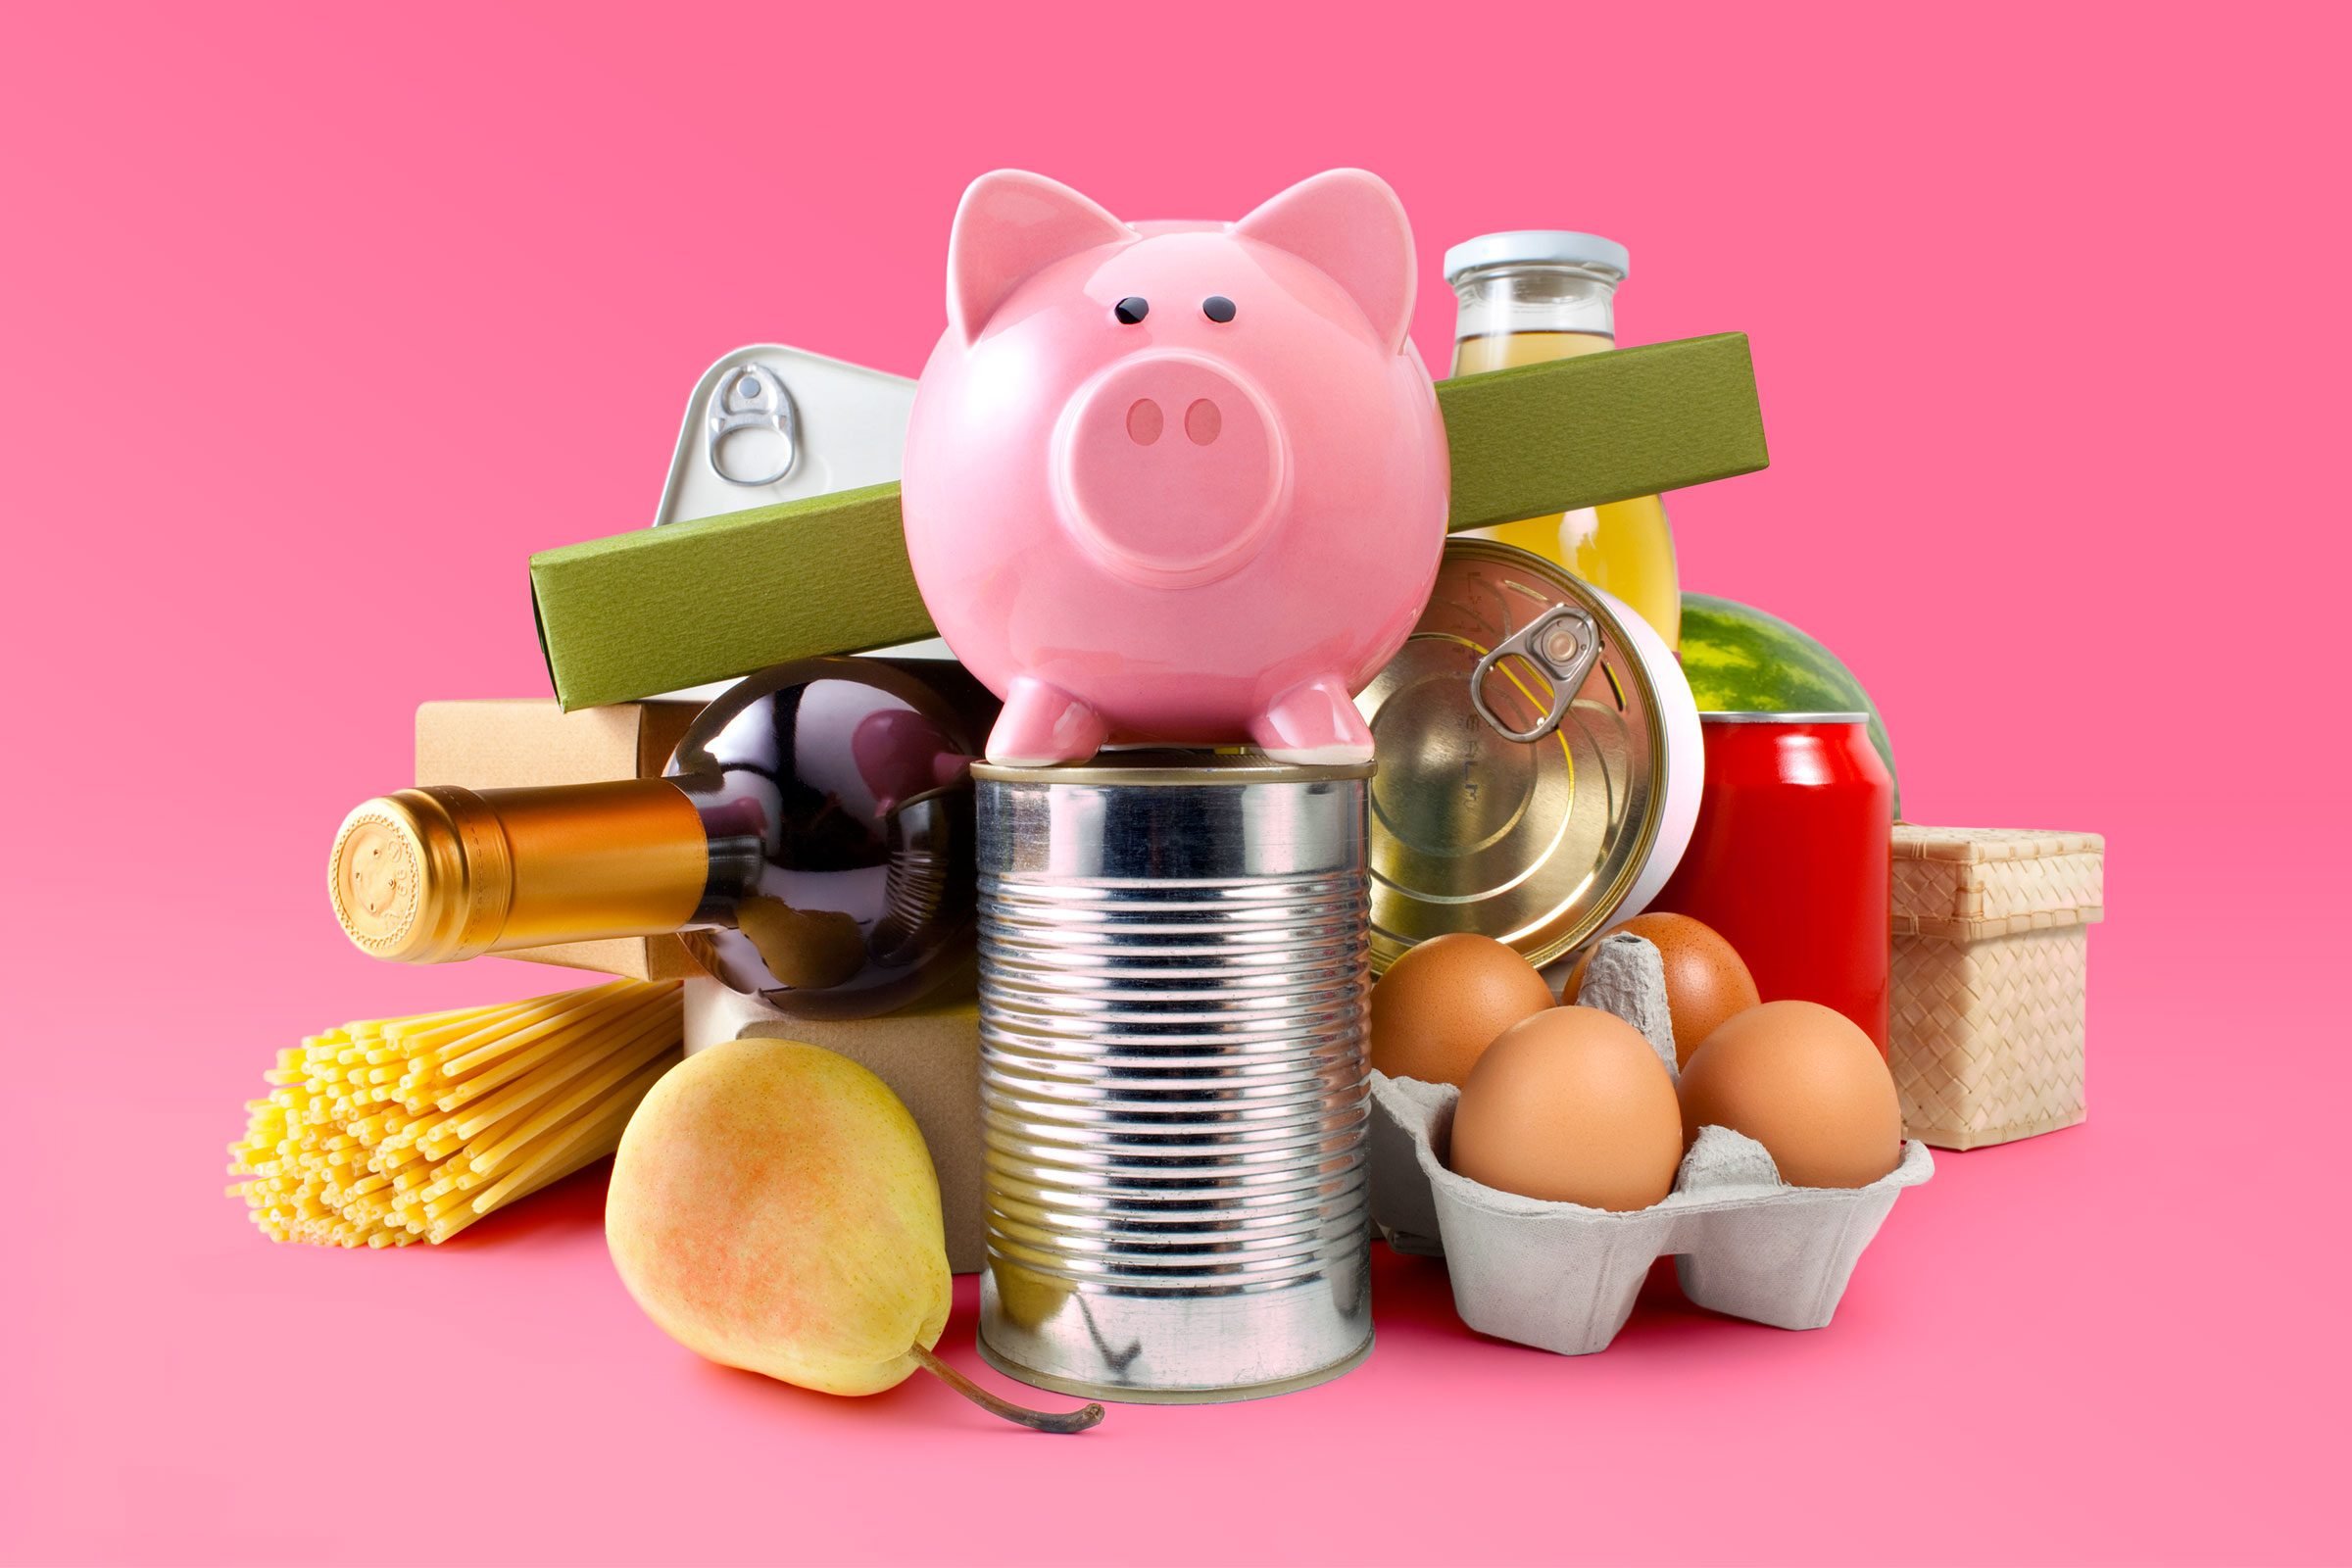 Low-cost grocery savings